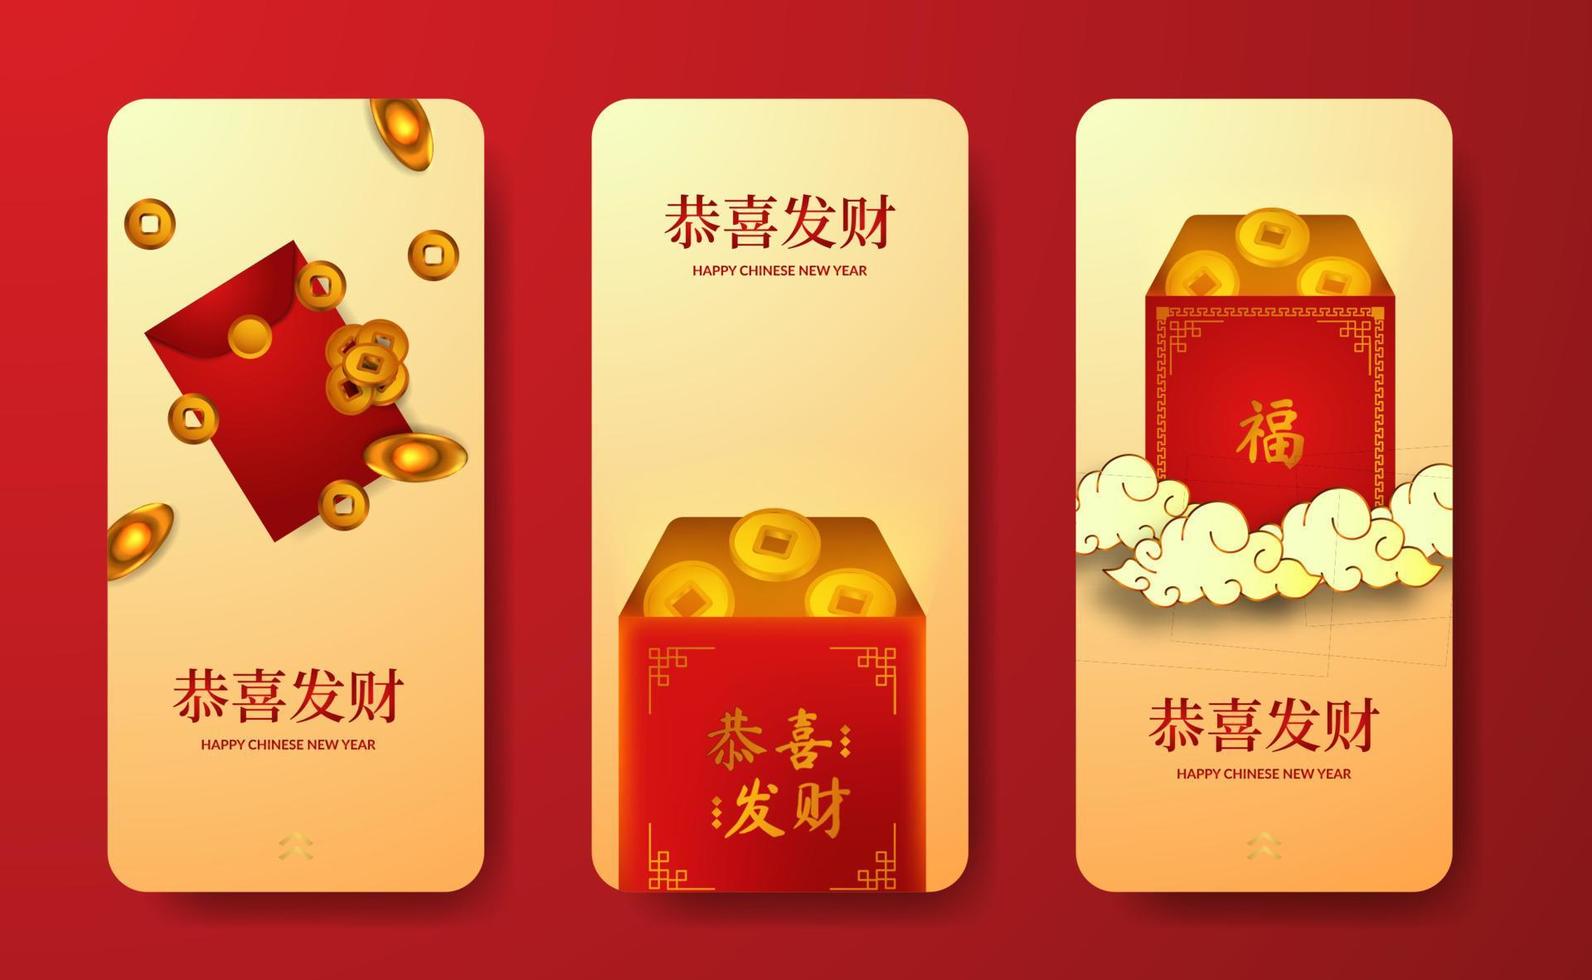 red envelope pocket gift wealth good fortune lucky for chinese new year social media stories template vector